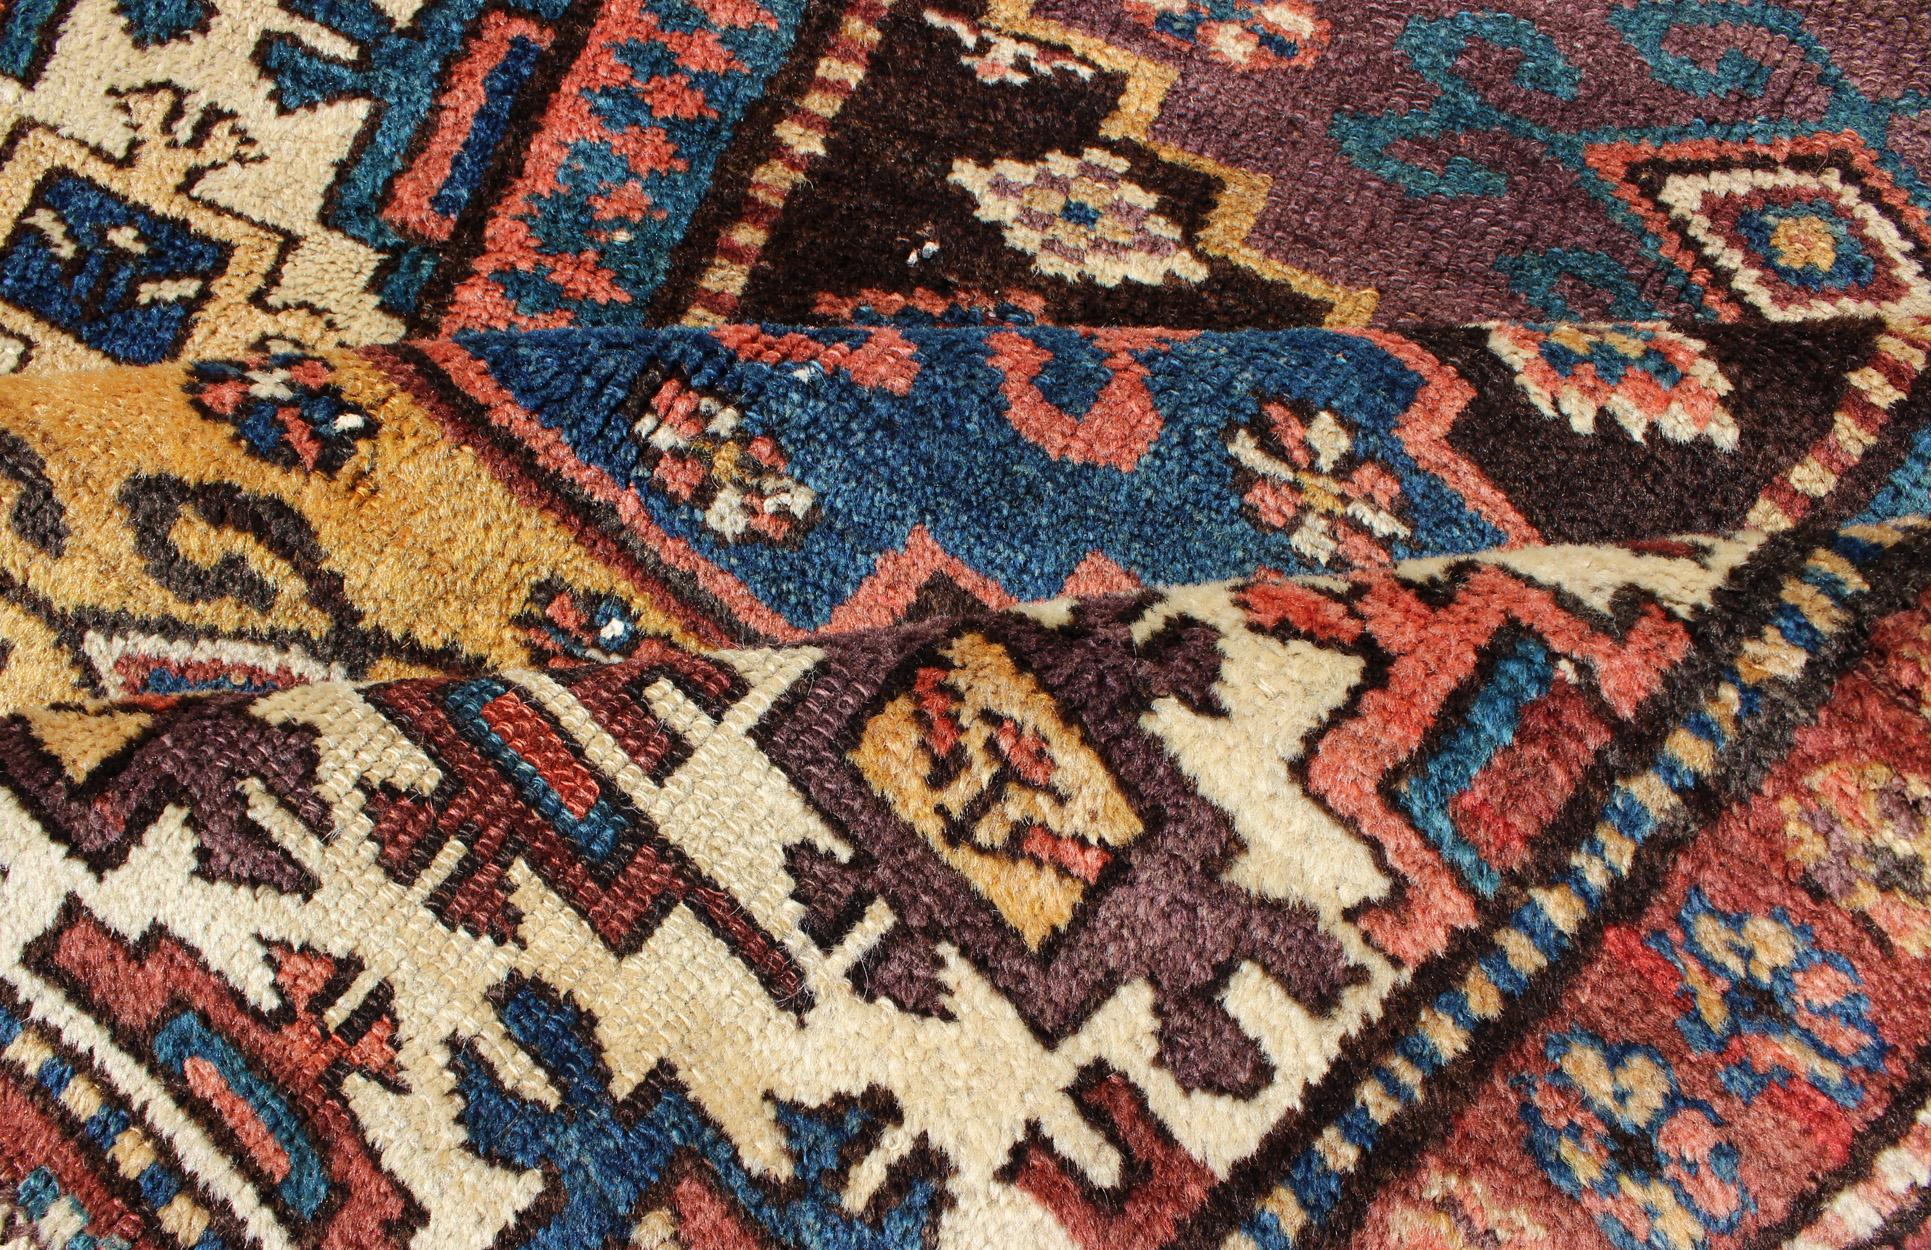 Tribal Antique N.W. Persian Gallery Rug in Jewel Tones with Diamond Geometric Motifs For Sale